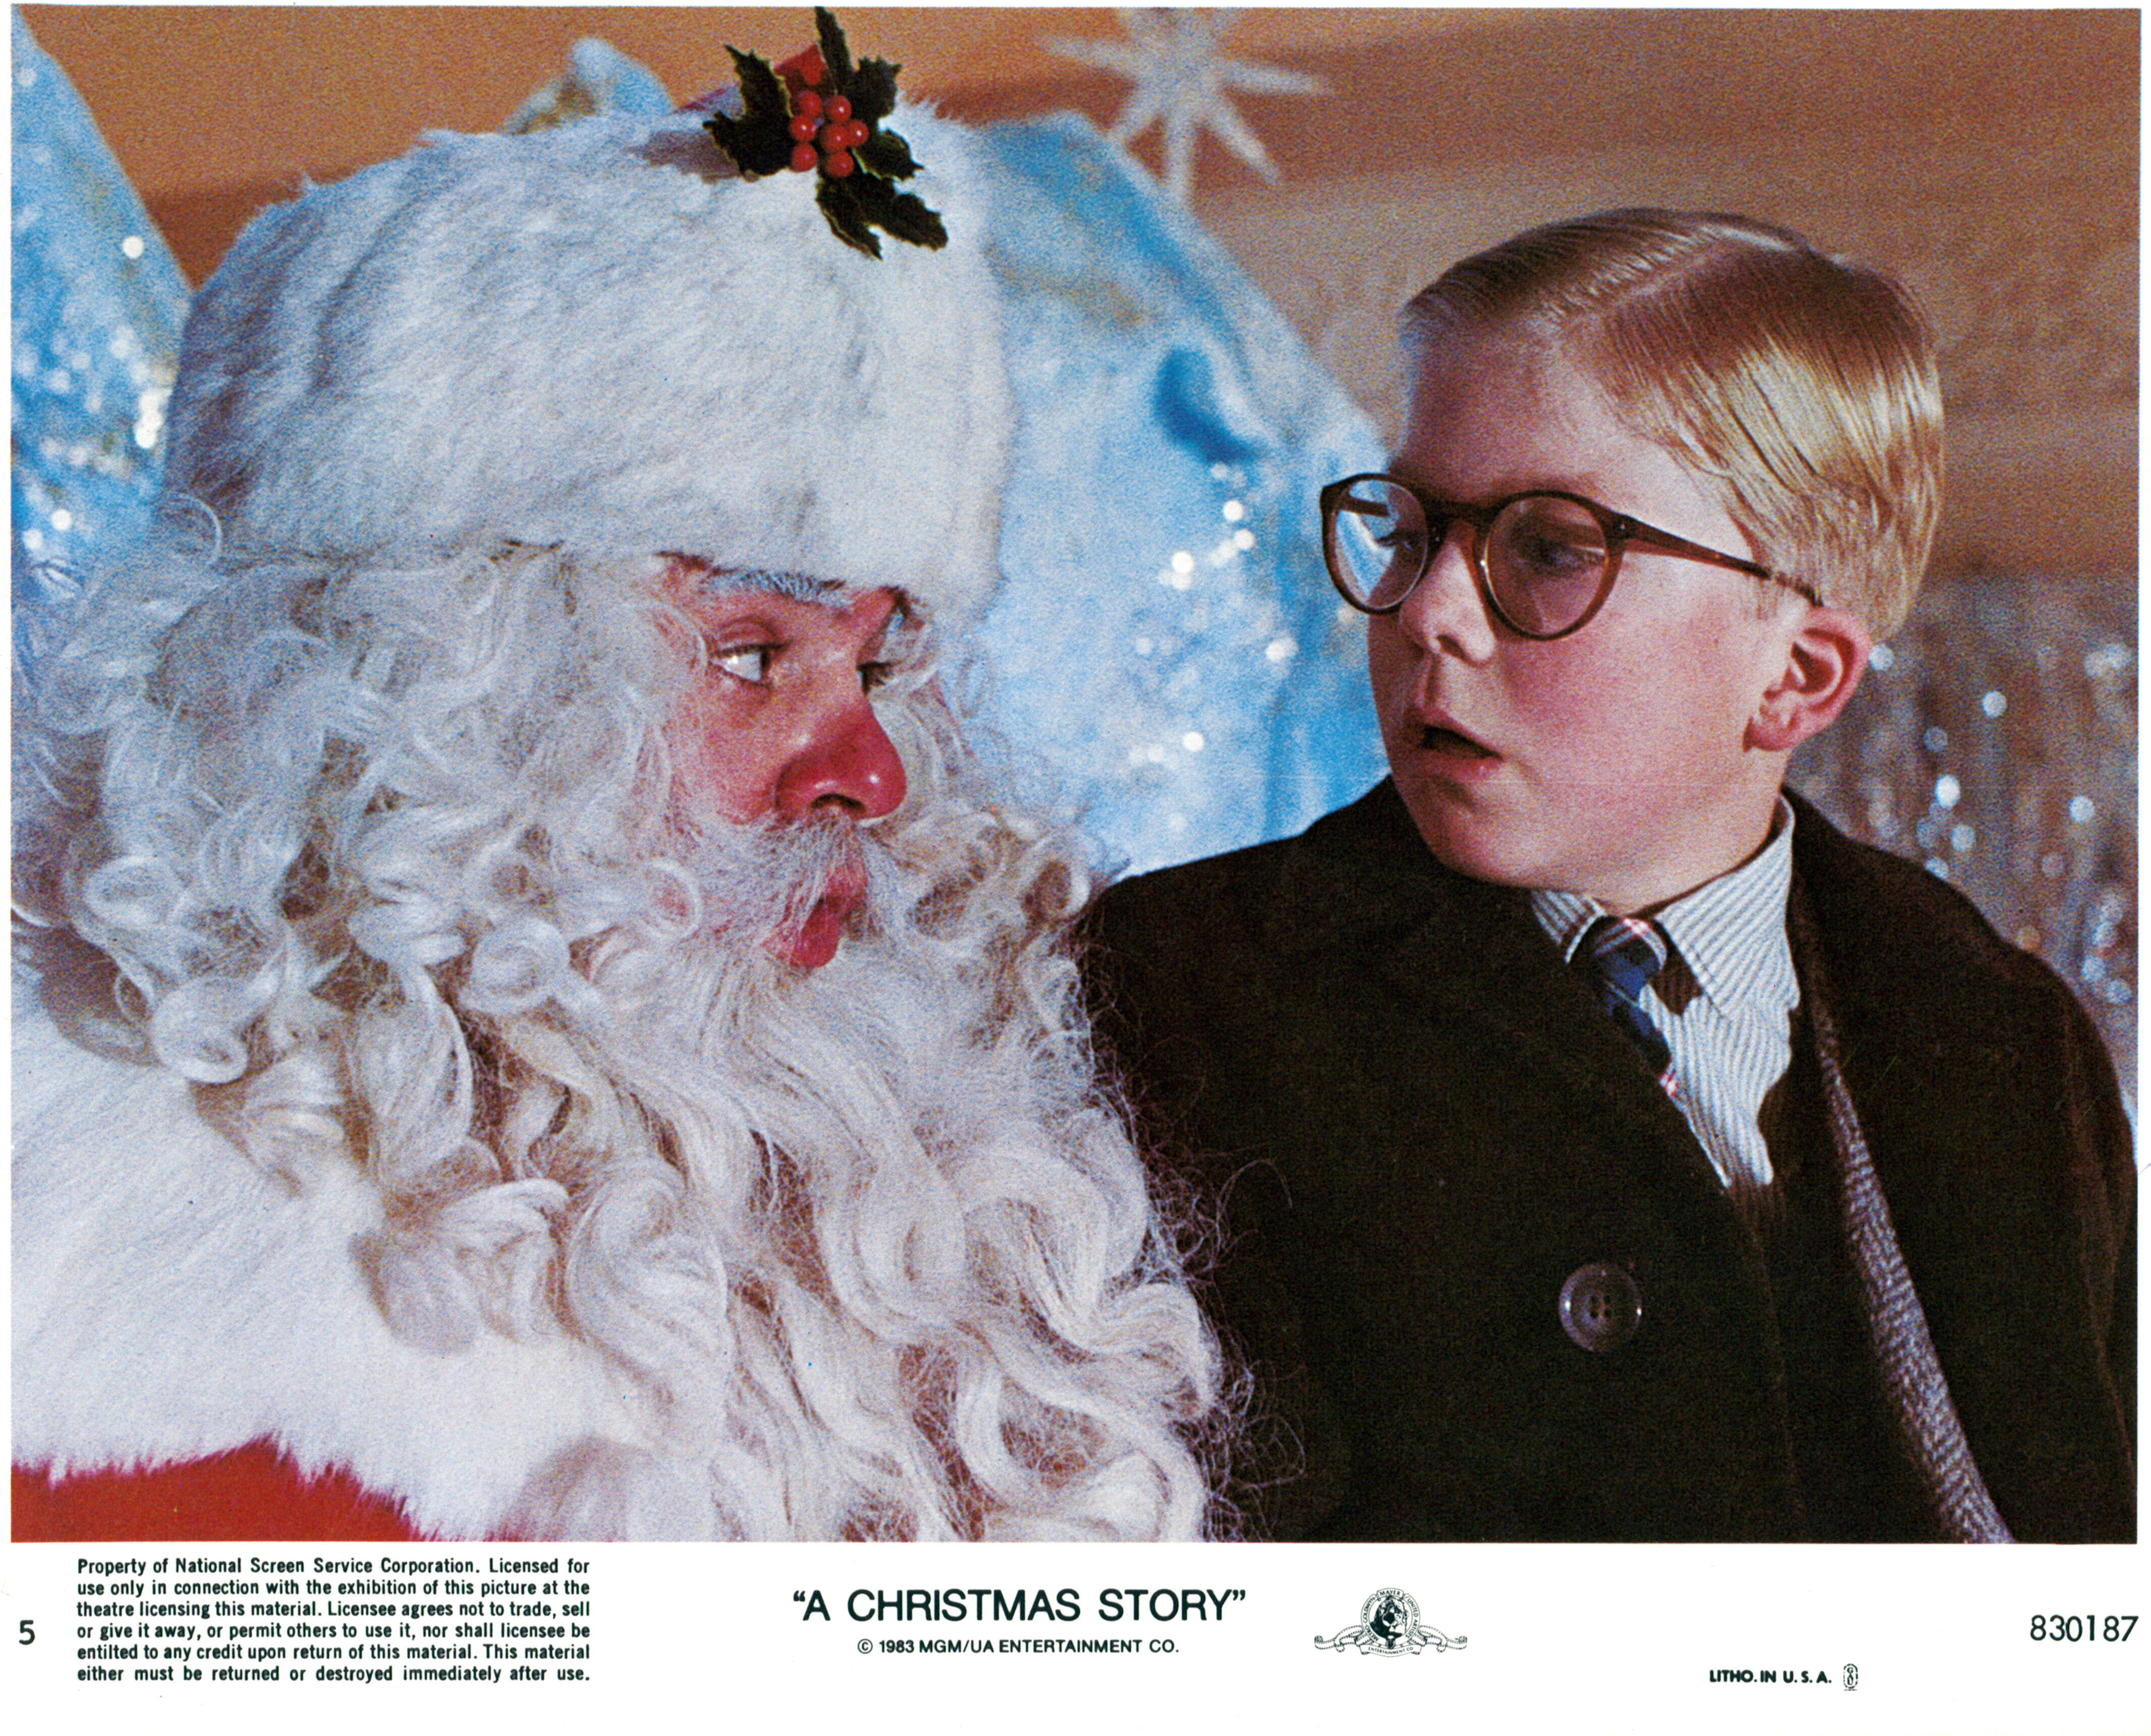 Peter Billingsley sits on Santa's lap in a scene from the film 'A Christmas Story', 1983. (Photo by Metro-Goldwyn-Mayer/Getty Images)